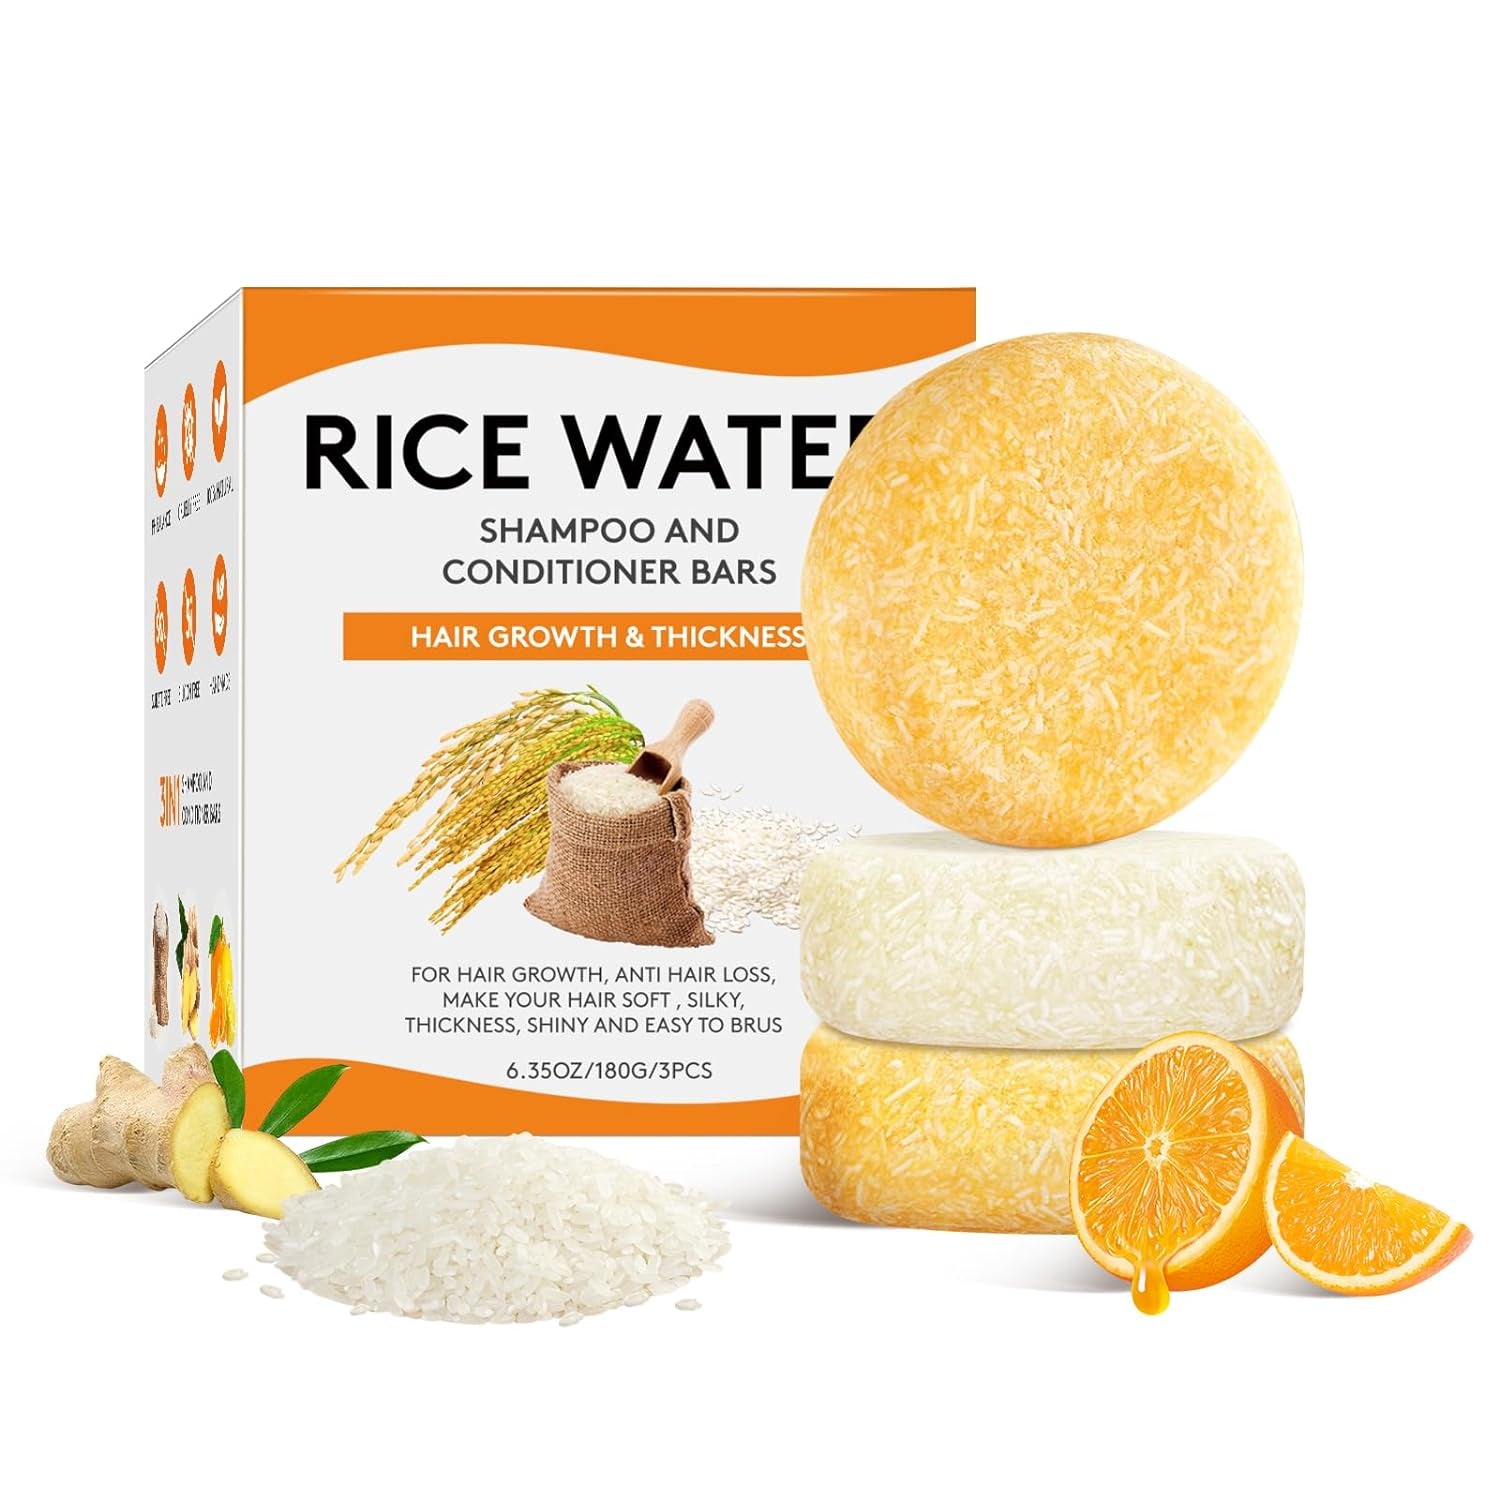 Rice Water Shampoo Bars and Conditioner Set for Hair Regrowth, Nature Organic Ginger Rice Water Shampoo Bar, Orange Solid Soap Hair Strengthening Conditioner, anti Hair Loss, PH Balanced